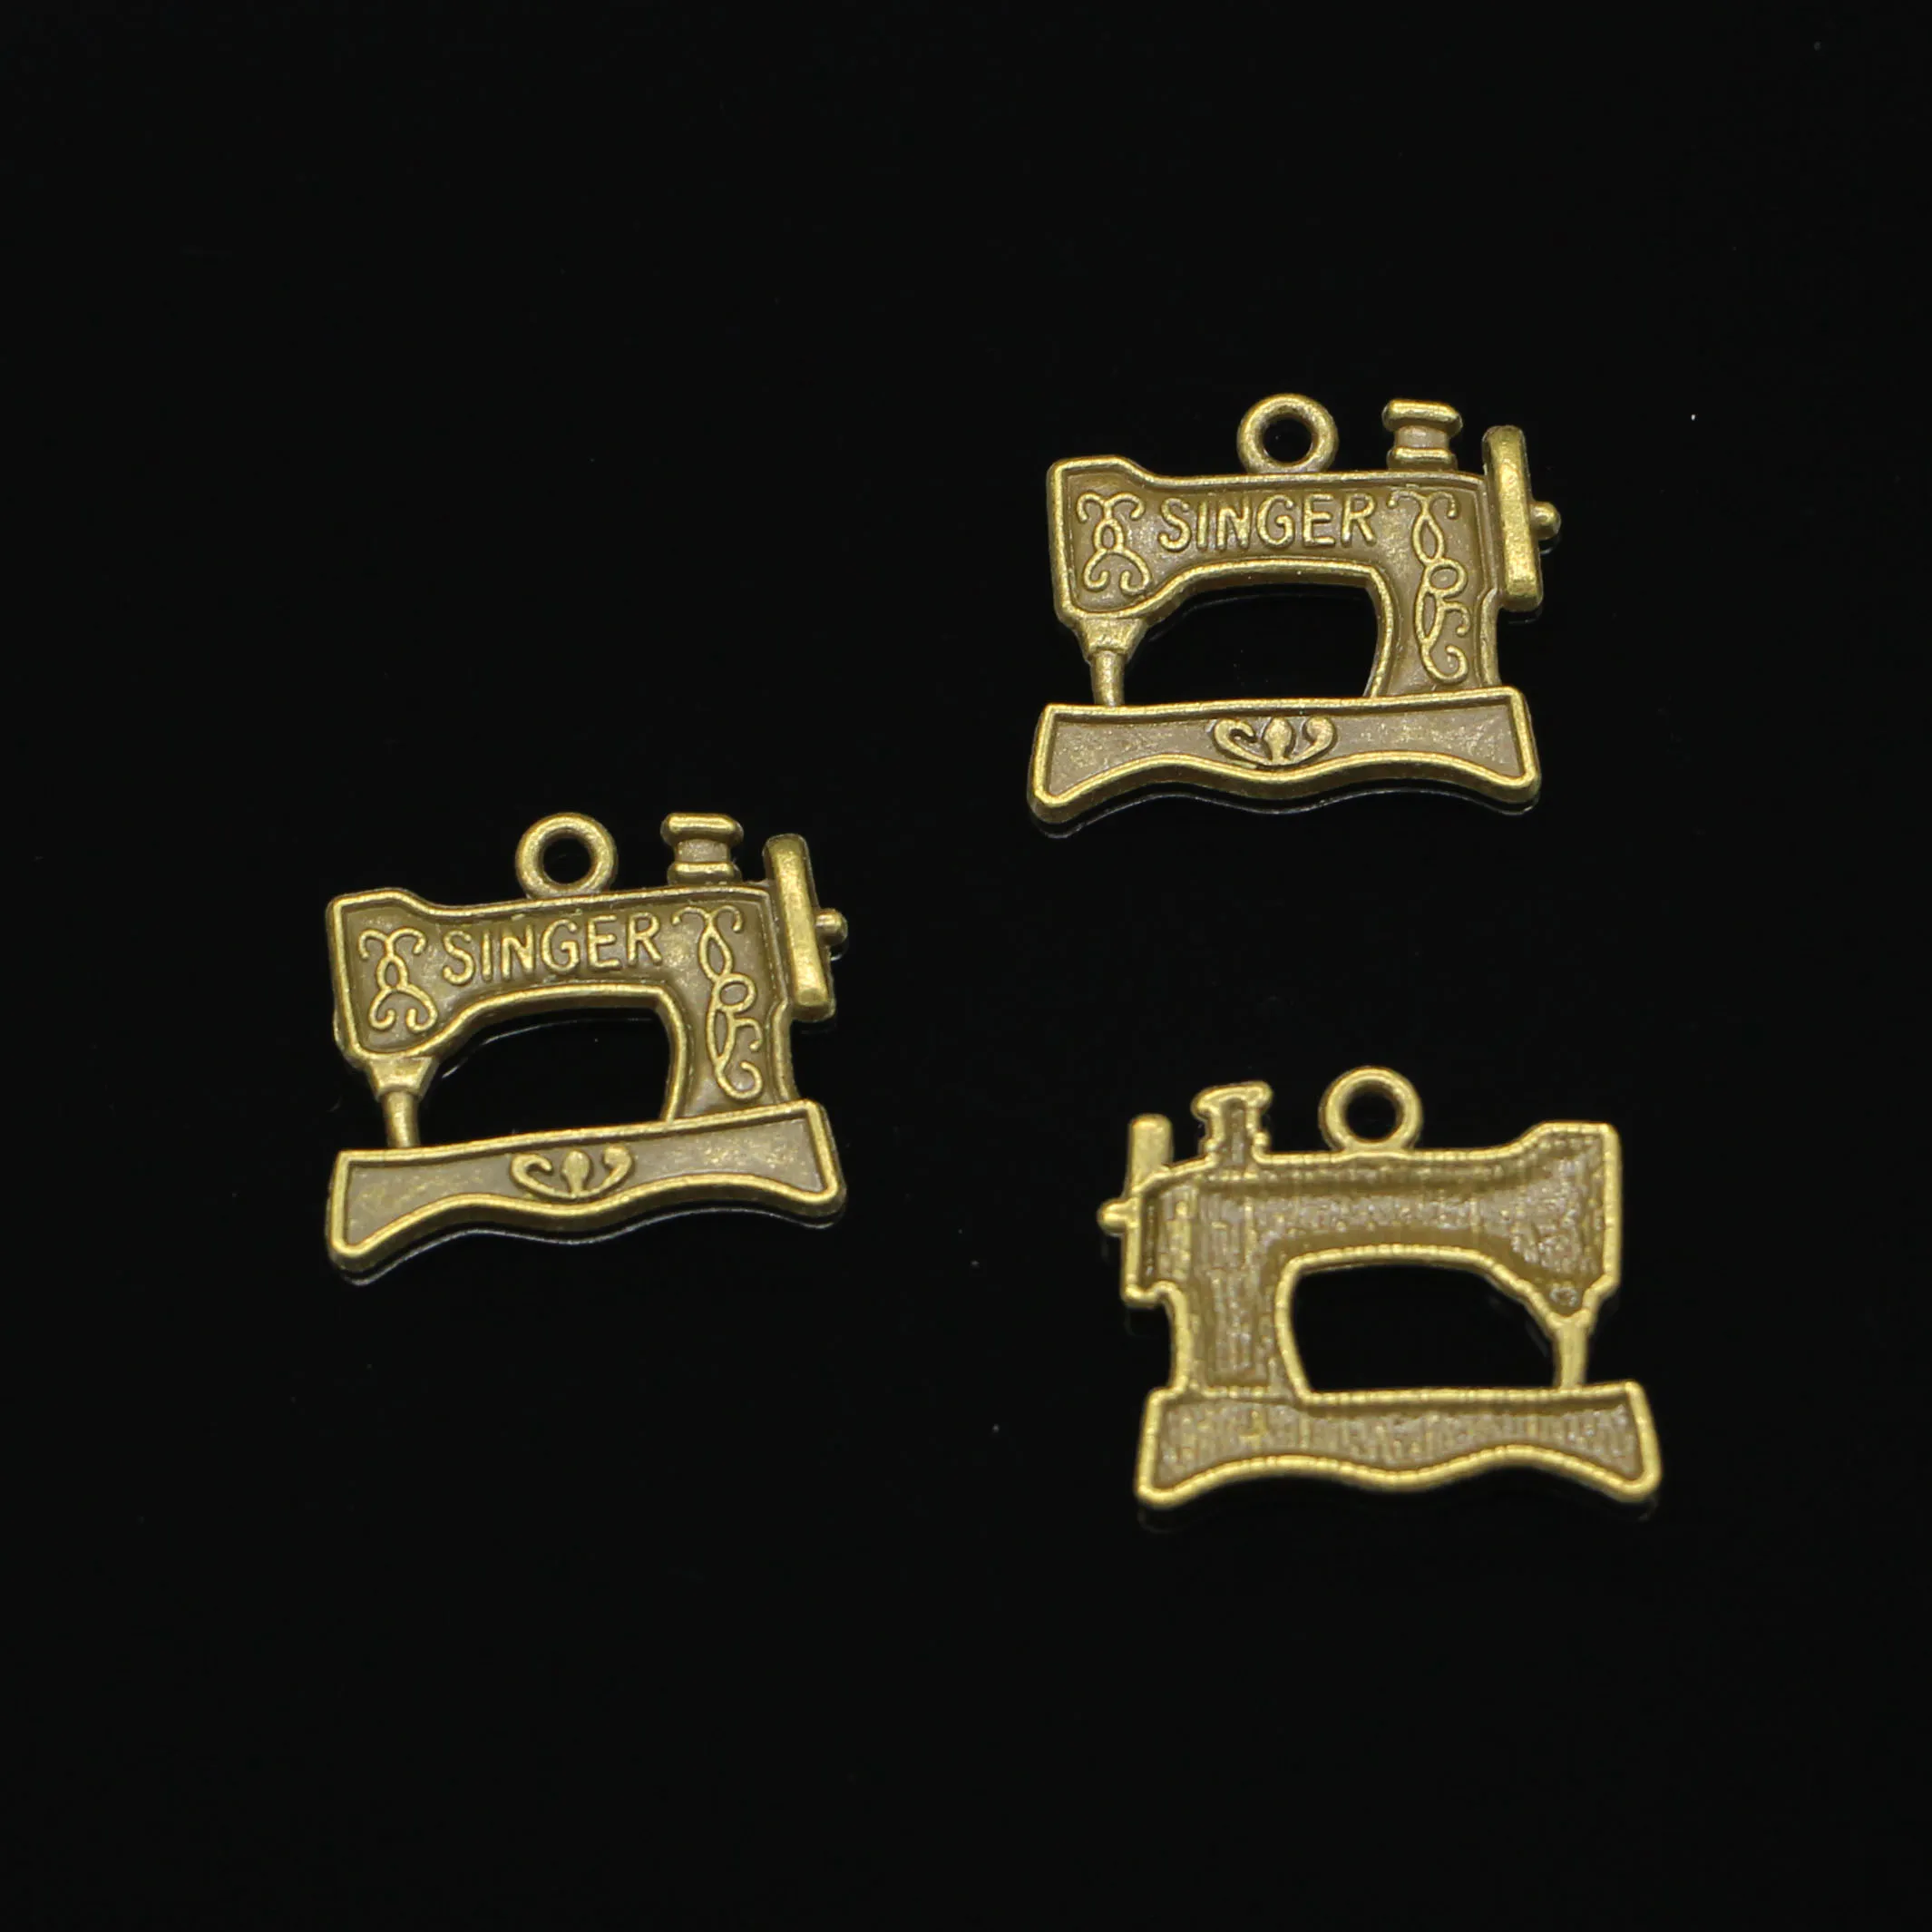 Zinc Alloy Charms Antique Bronze Plated vintage singer treadle sewing machine Charms for Jewelry Making DIY Handmade Pendant304k